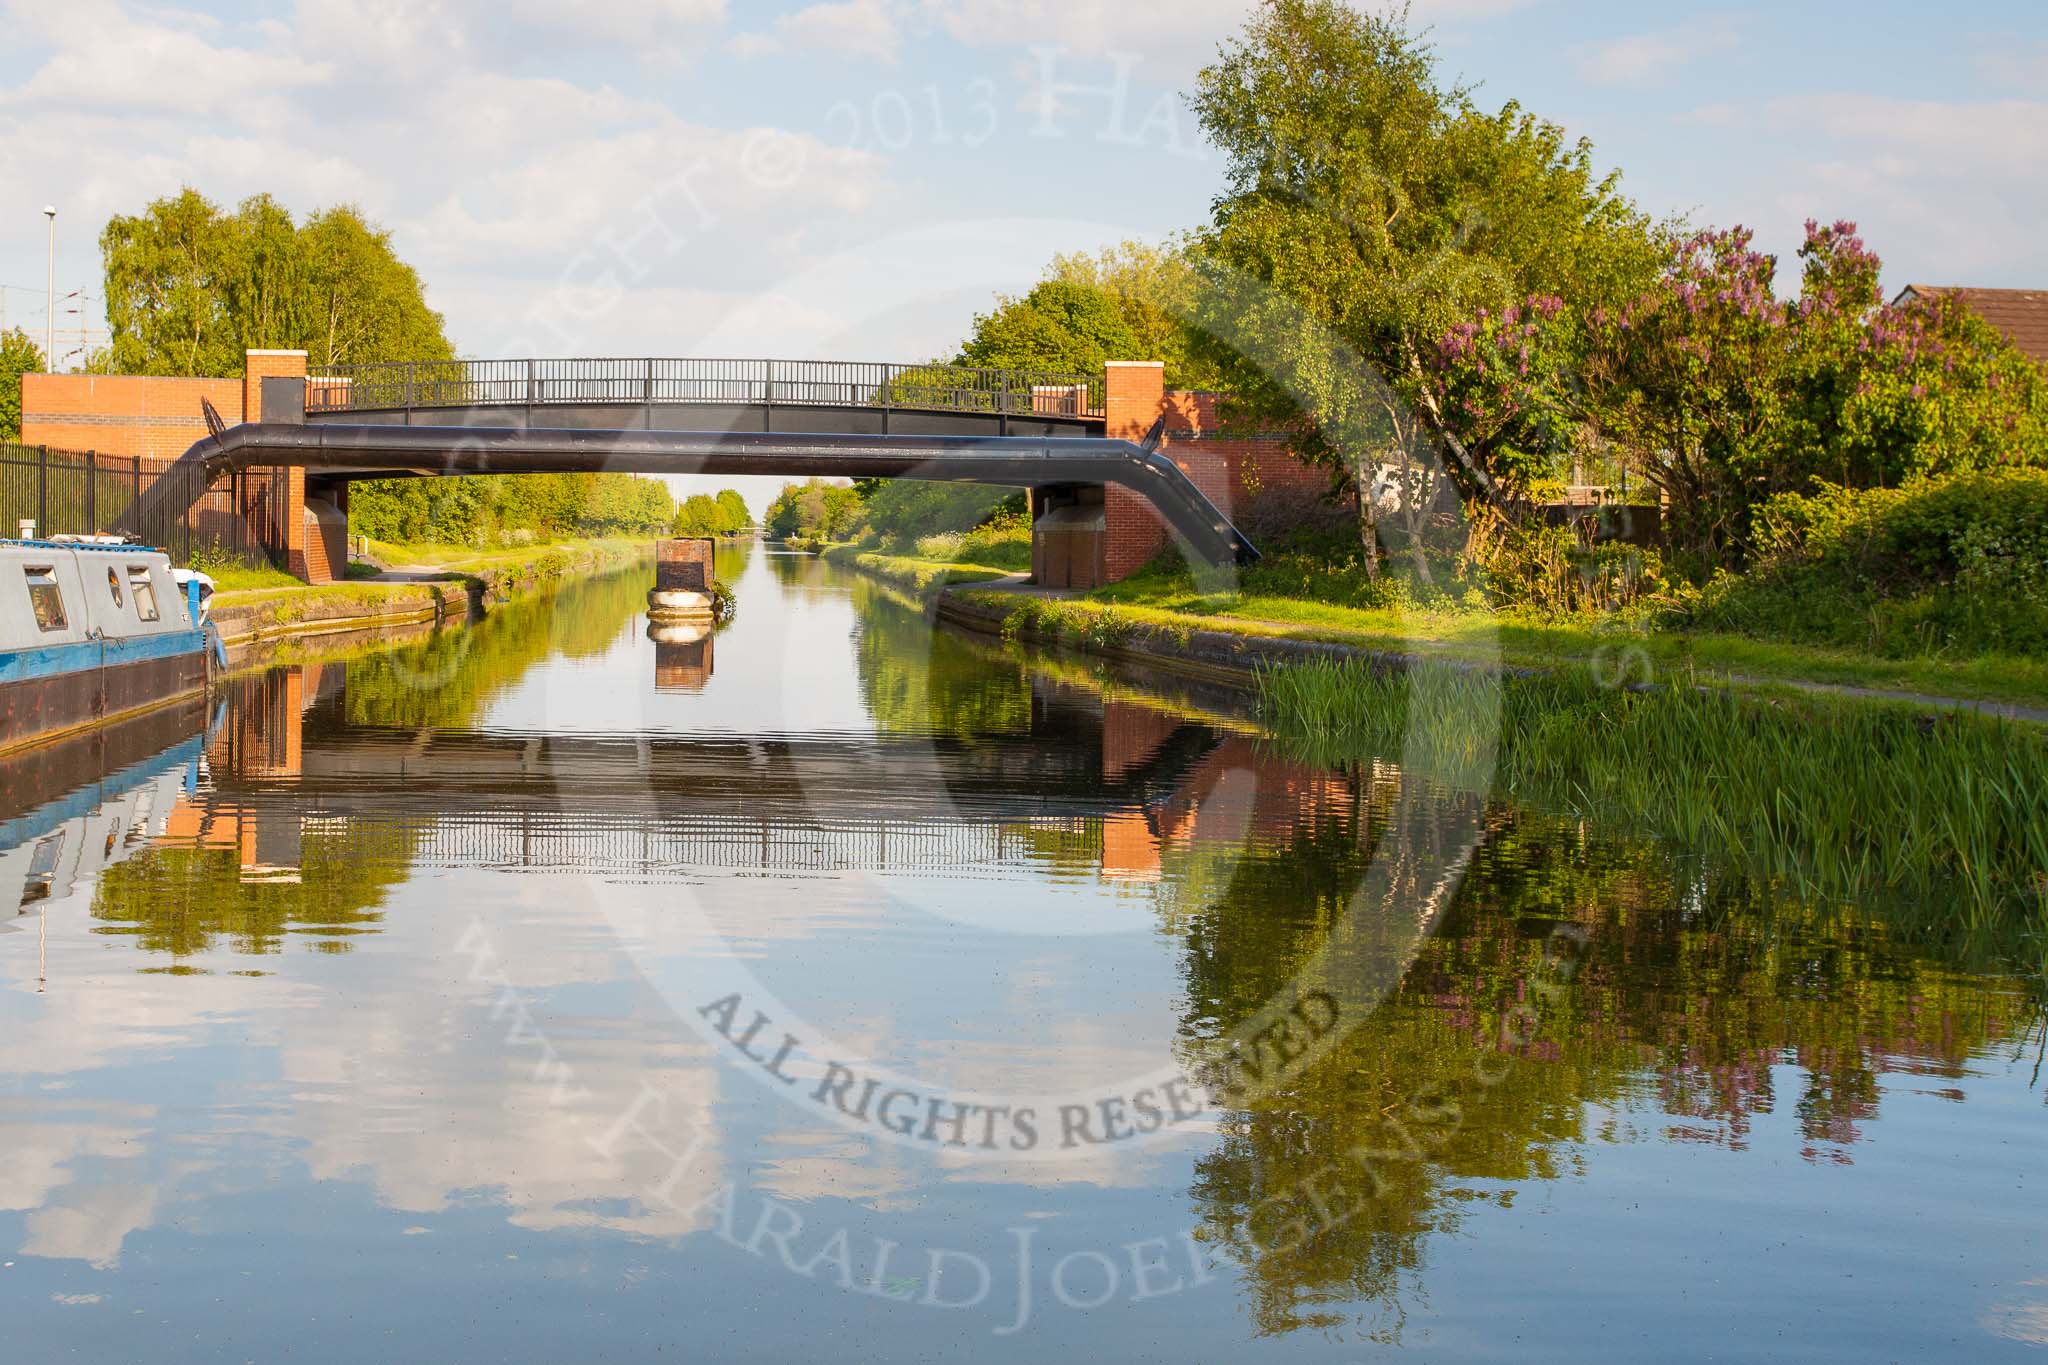 BCN Marathon Challenge 2013: Watery Lane Bridge on the BCN Main Line in Tipton, close to the site of Watery Lane Junction, where the Tipton Green and Toll End Communication joined the New Main Line..
Birmingham Canal Navigation,


United Kingdom,
on 25 May 2013 at 18:19, image #272